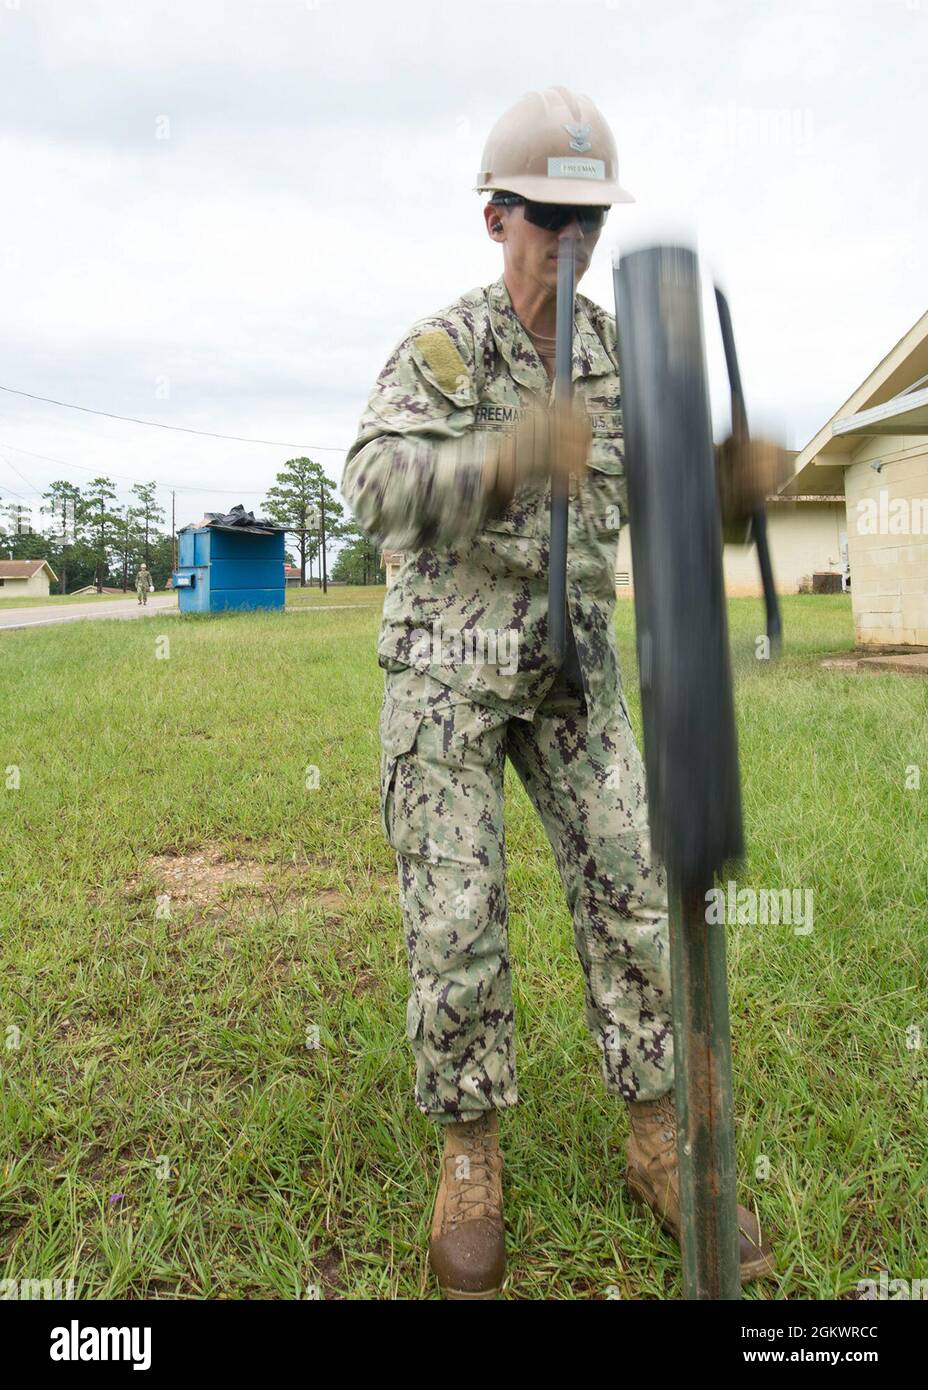 Construction Electrician 2nd Class Blake Freeman, from Marietta, Oklahoma, assigned to U.S. Naval Mobile Construction Battalion (NMCB) 133, uses a stake post driver to secure a stake during a Field Training Exercise (FTX) at Camp Shelby, July 12. FTX is a training evolution where Seabee forces plan and execute multiple mission essential tasks including convoy security, force protection, and camp setup prior to deployment. Stock Photo